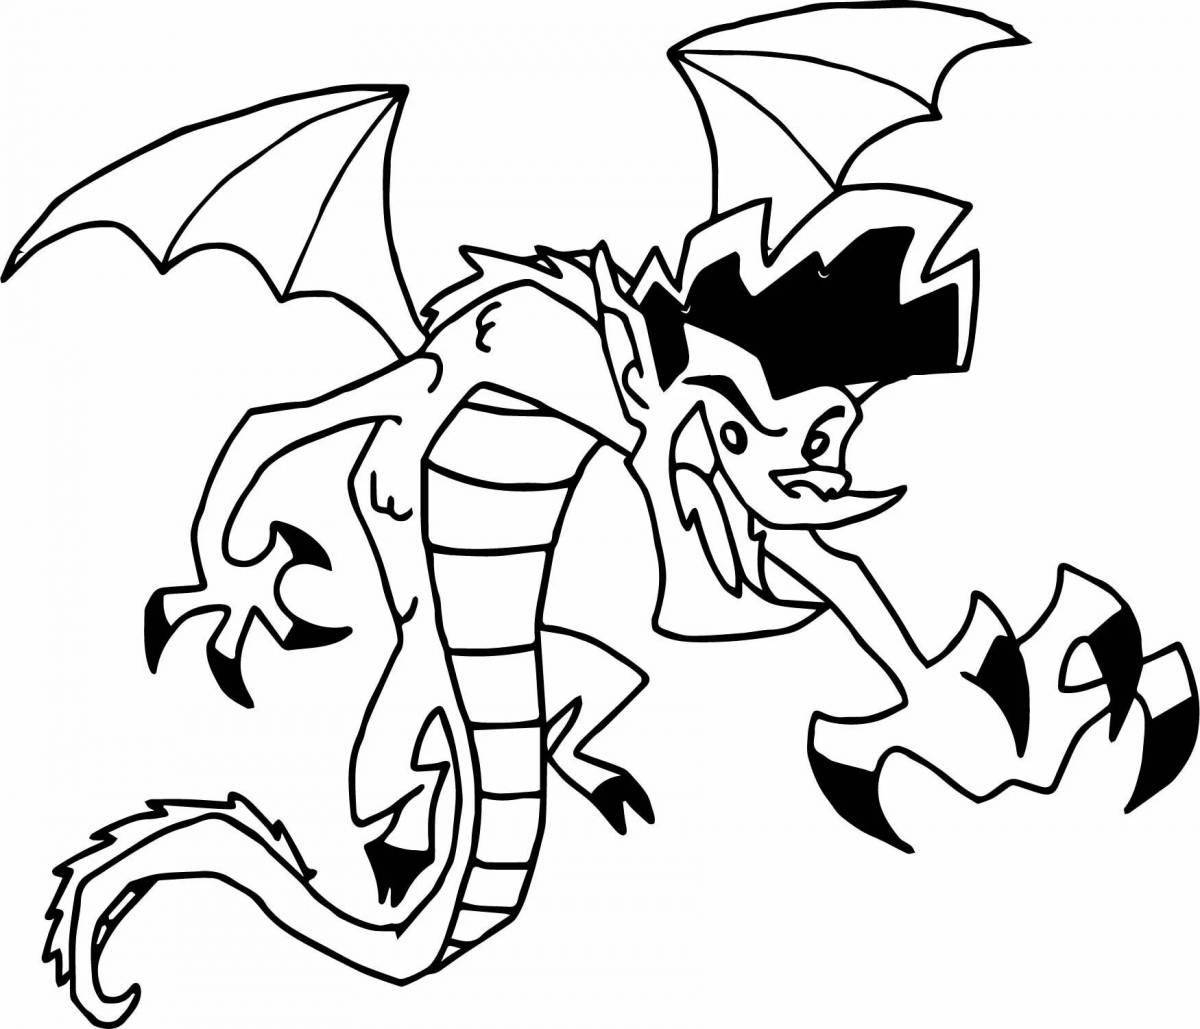 A brightly colored american dragon coloring page